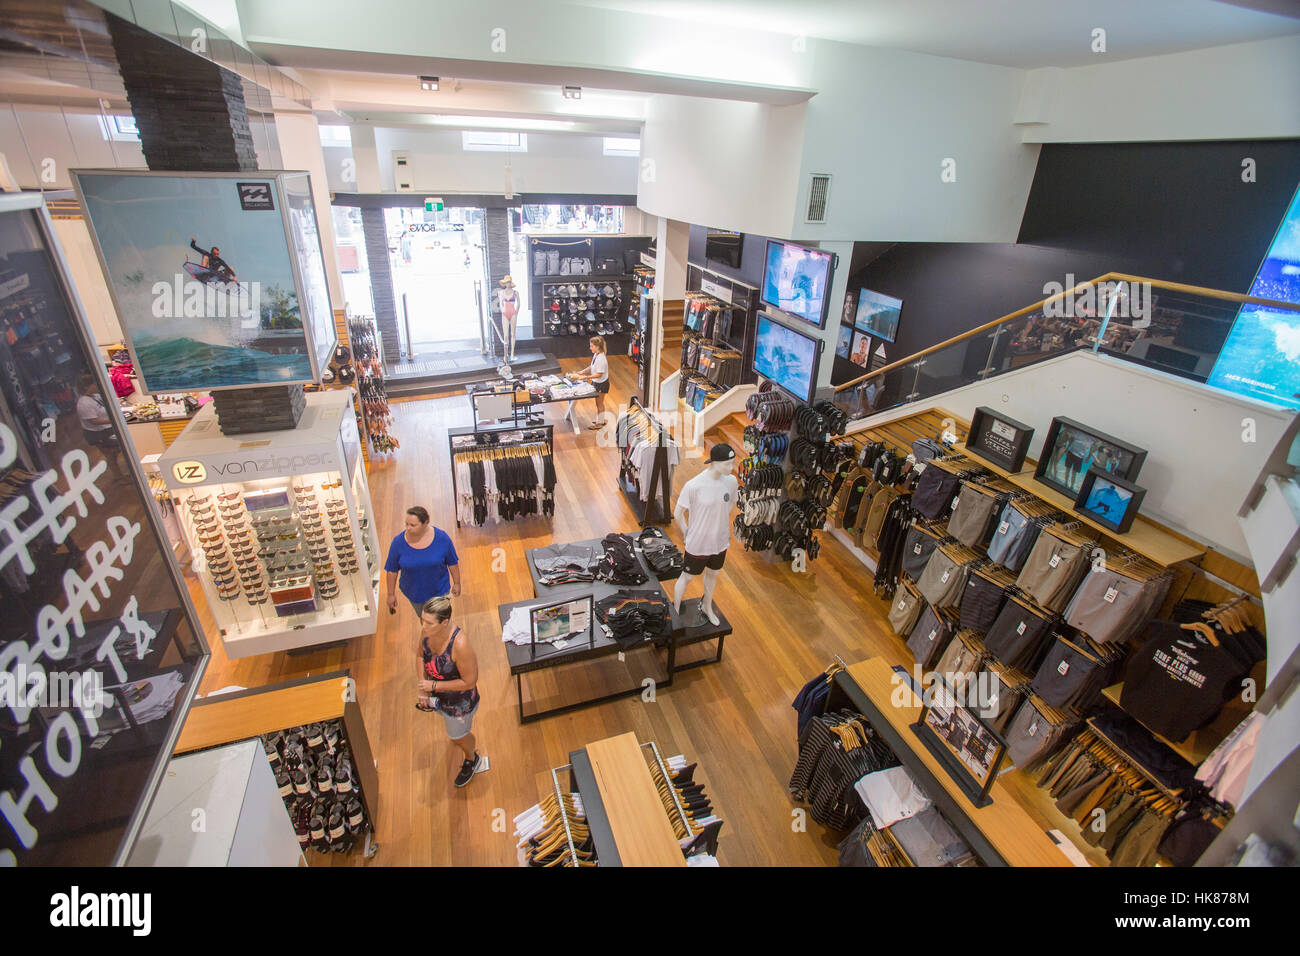 Interior of a Billabong Surf wear gear store shop in Manly Stock Photo -  Alamy